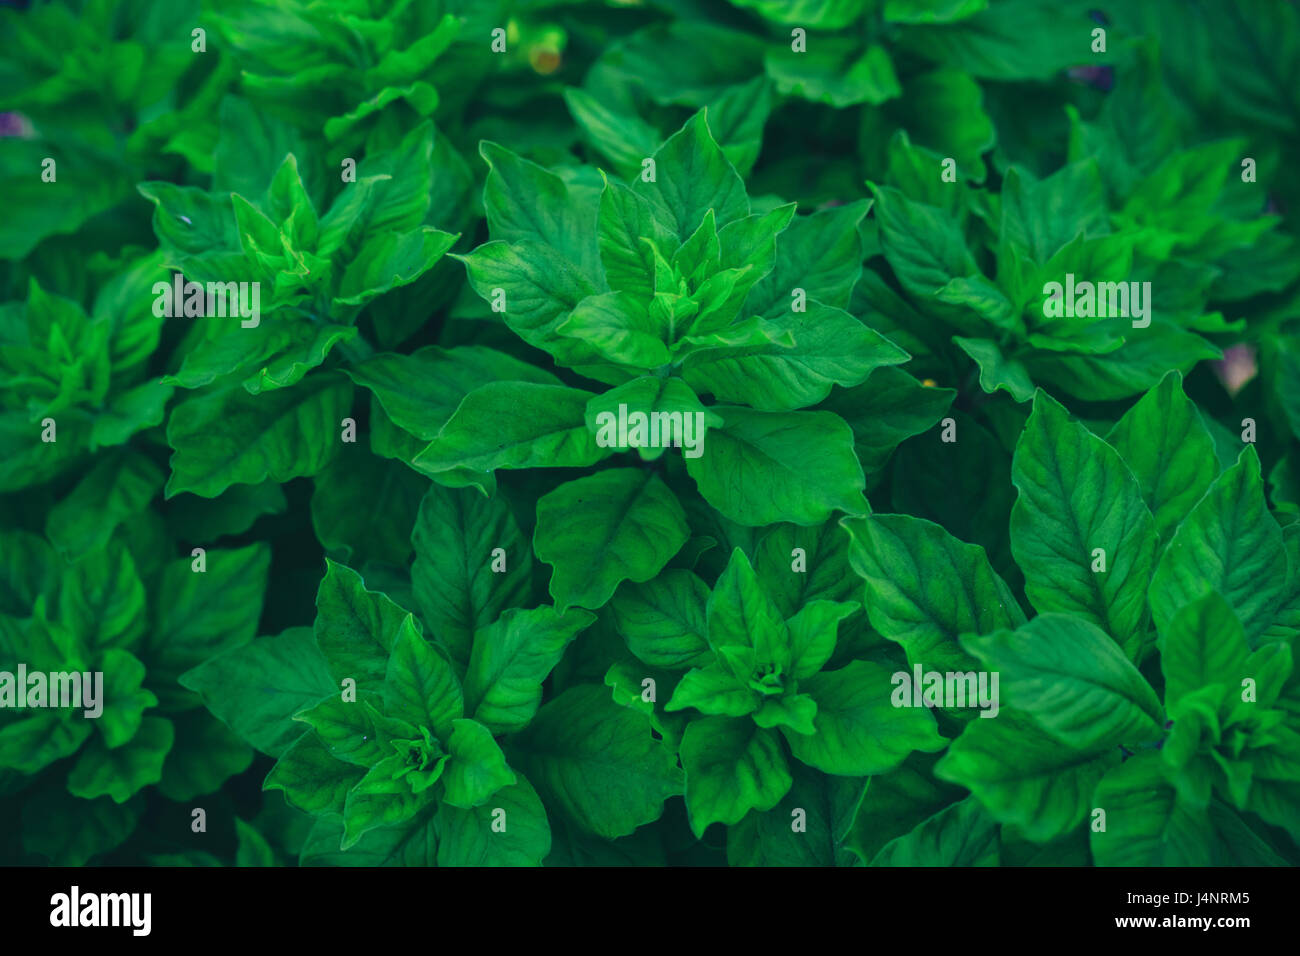 Growing basil or mint plants, top view Stock Photo